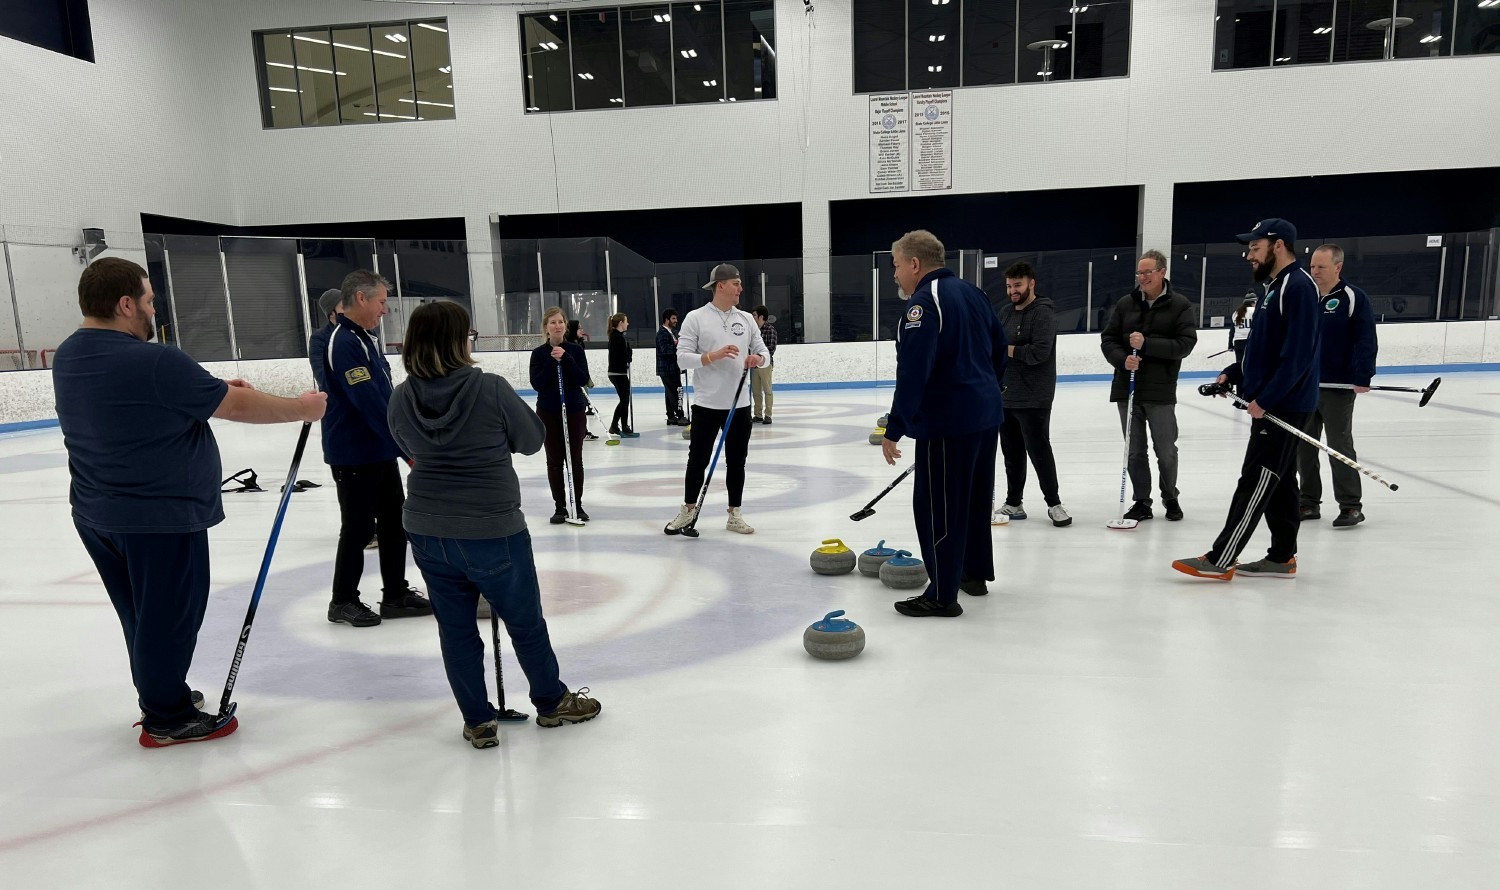 PFG and Vicus Capital staff know how to have fun outside the office; and in this case, curling at a local ice rink!